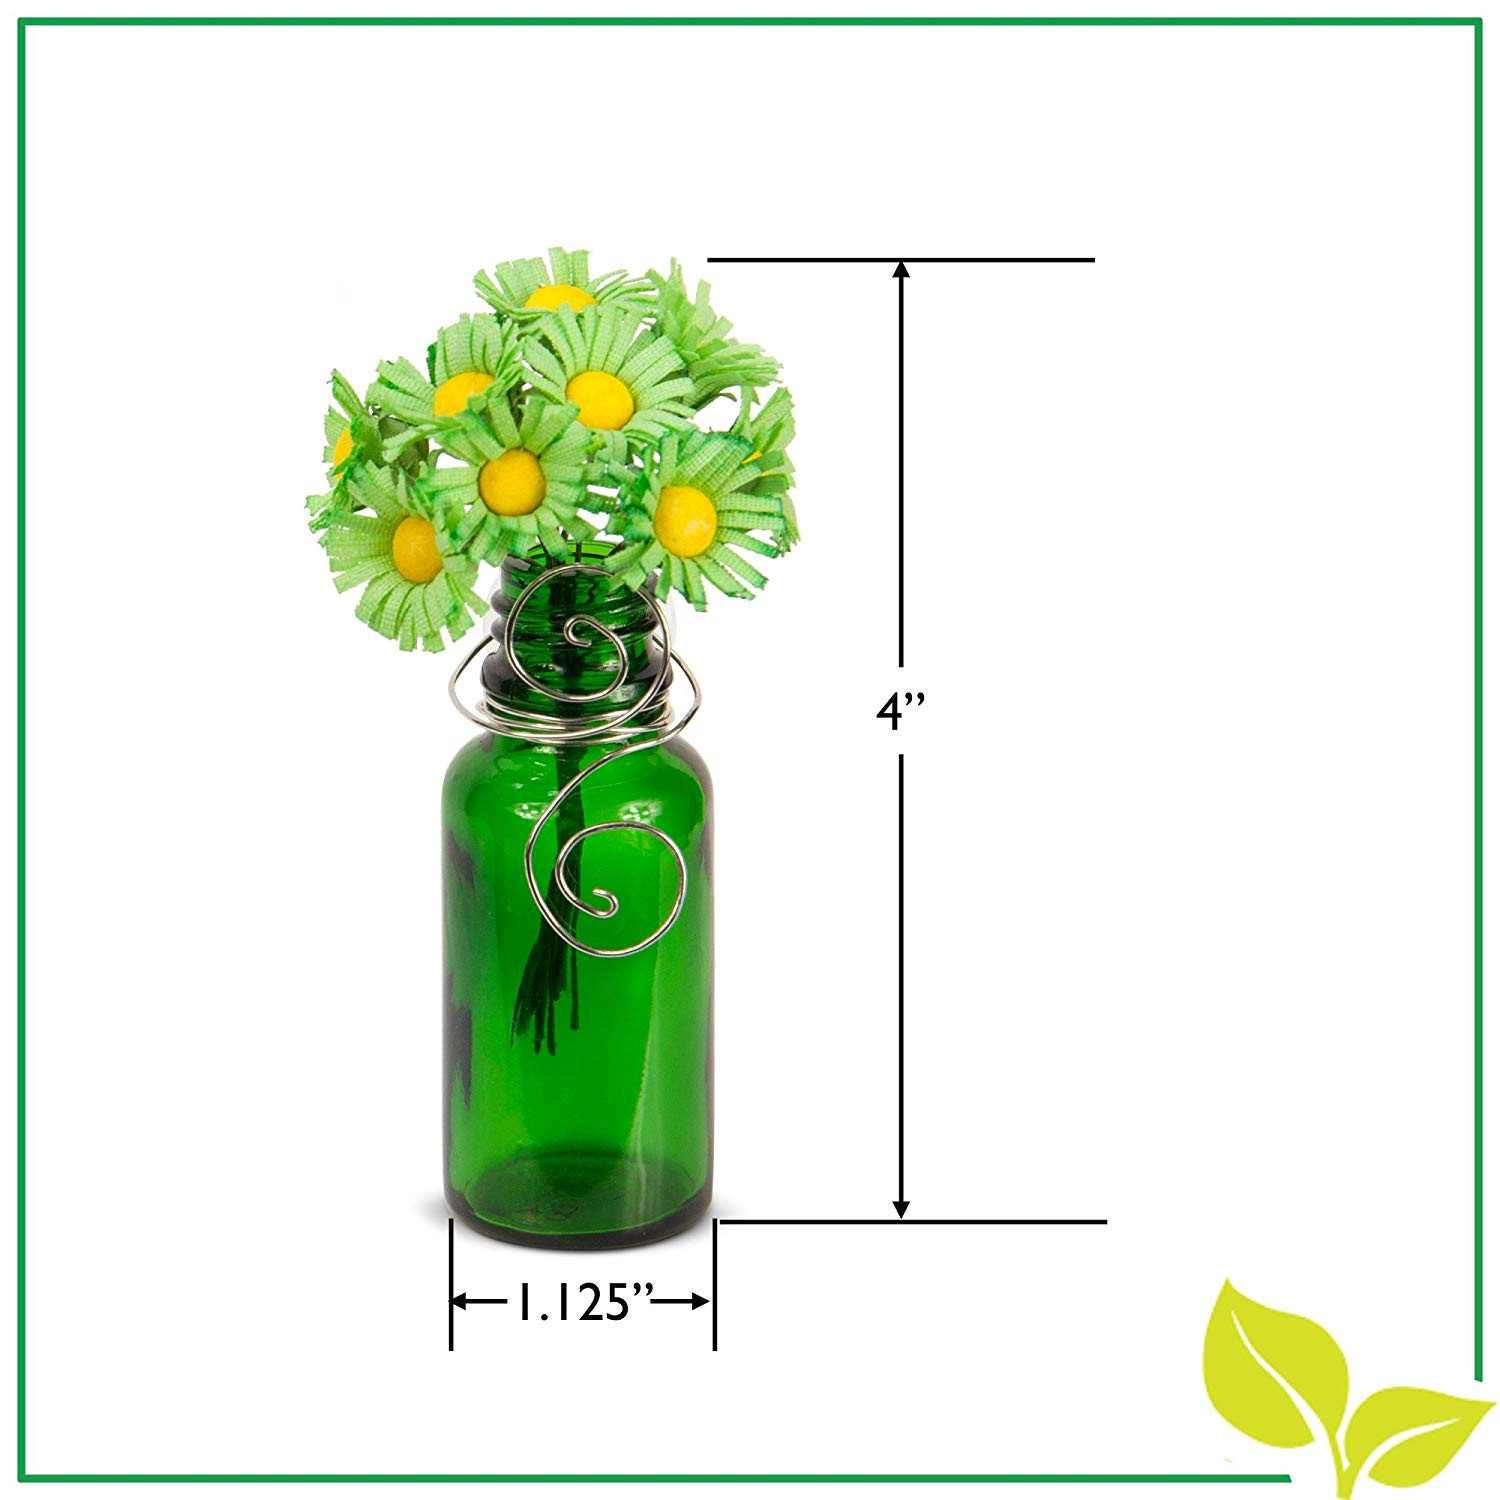 24 Nice Test Tube Flower Vase Rack 2024 free download test tube flower vase rack of amazon com vazzini mini vase bouquet suction cup bud bottle for amazon com vazzini mini vase bouquet suction cup bud bottle holder with flowers decorative for w